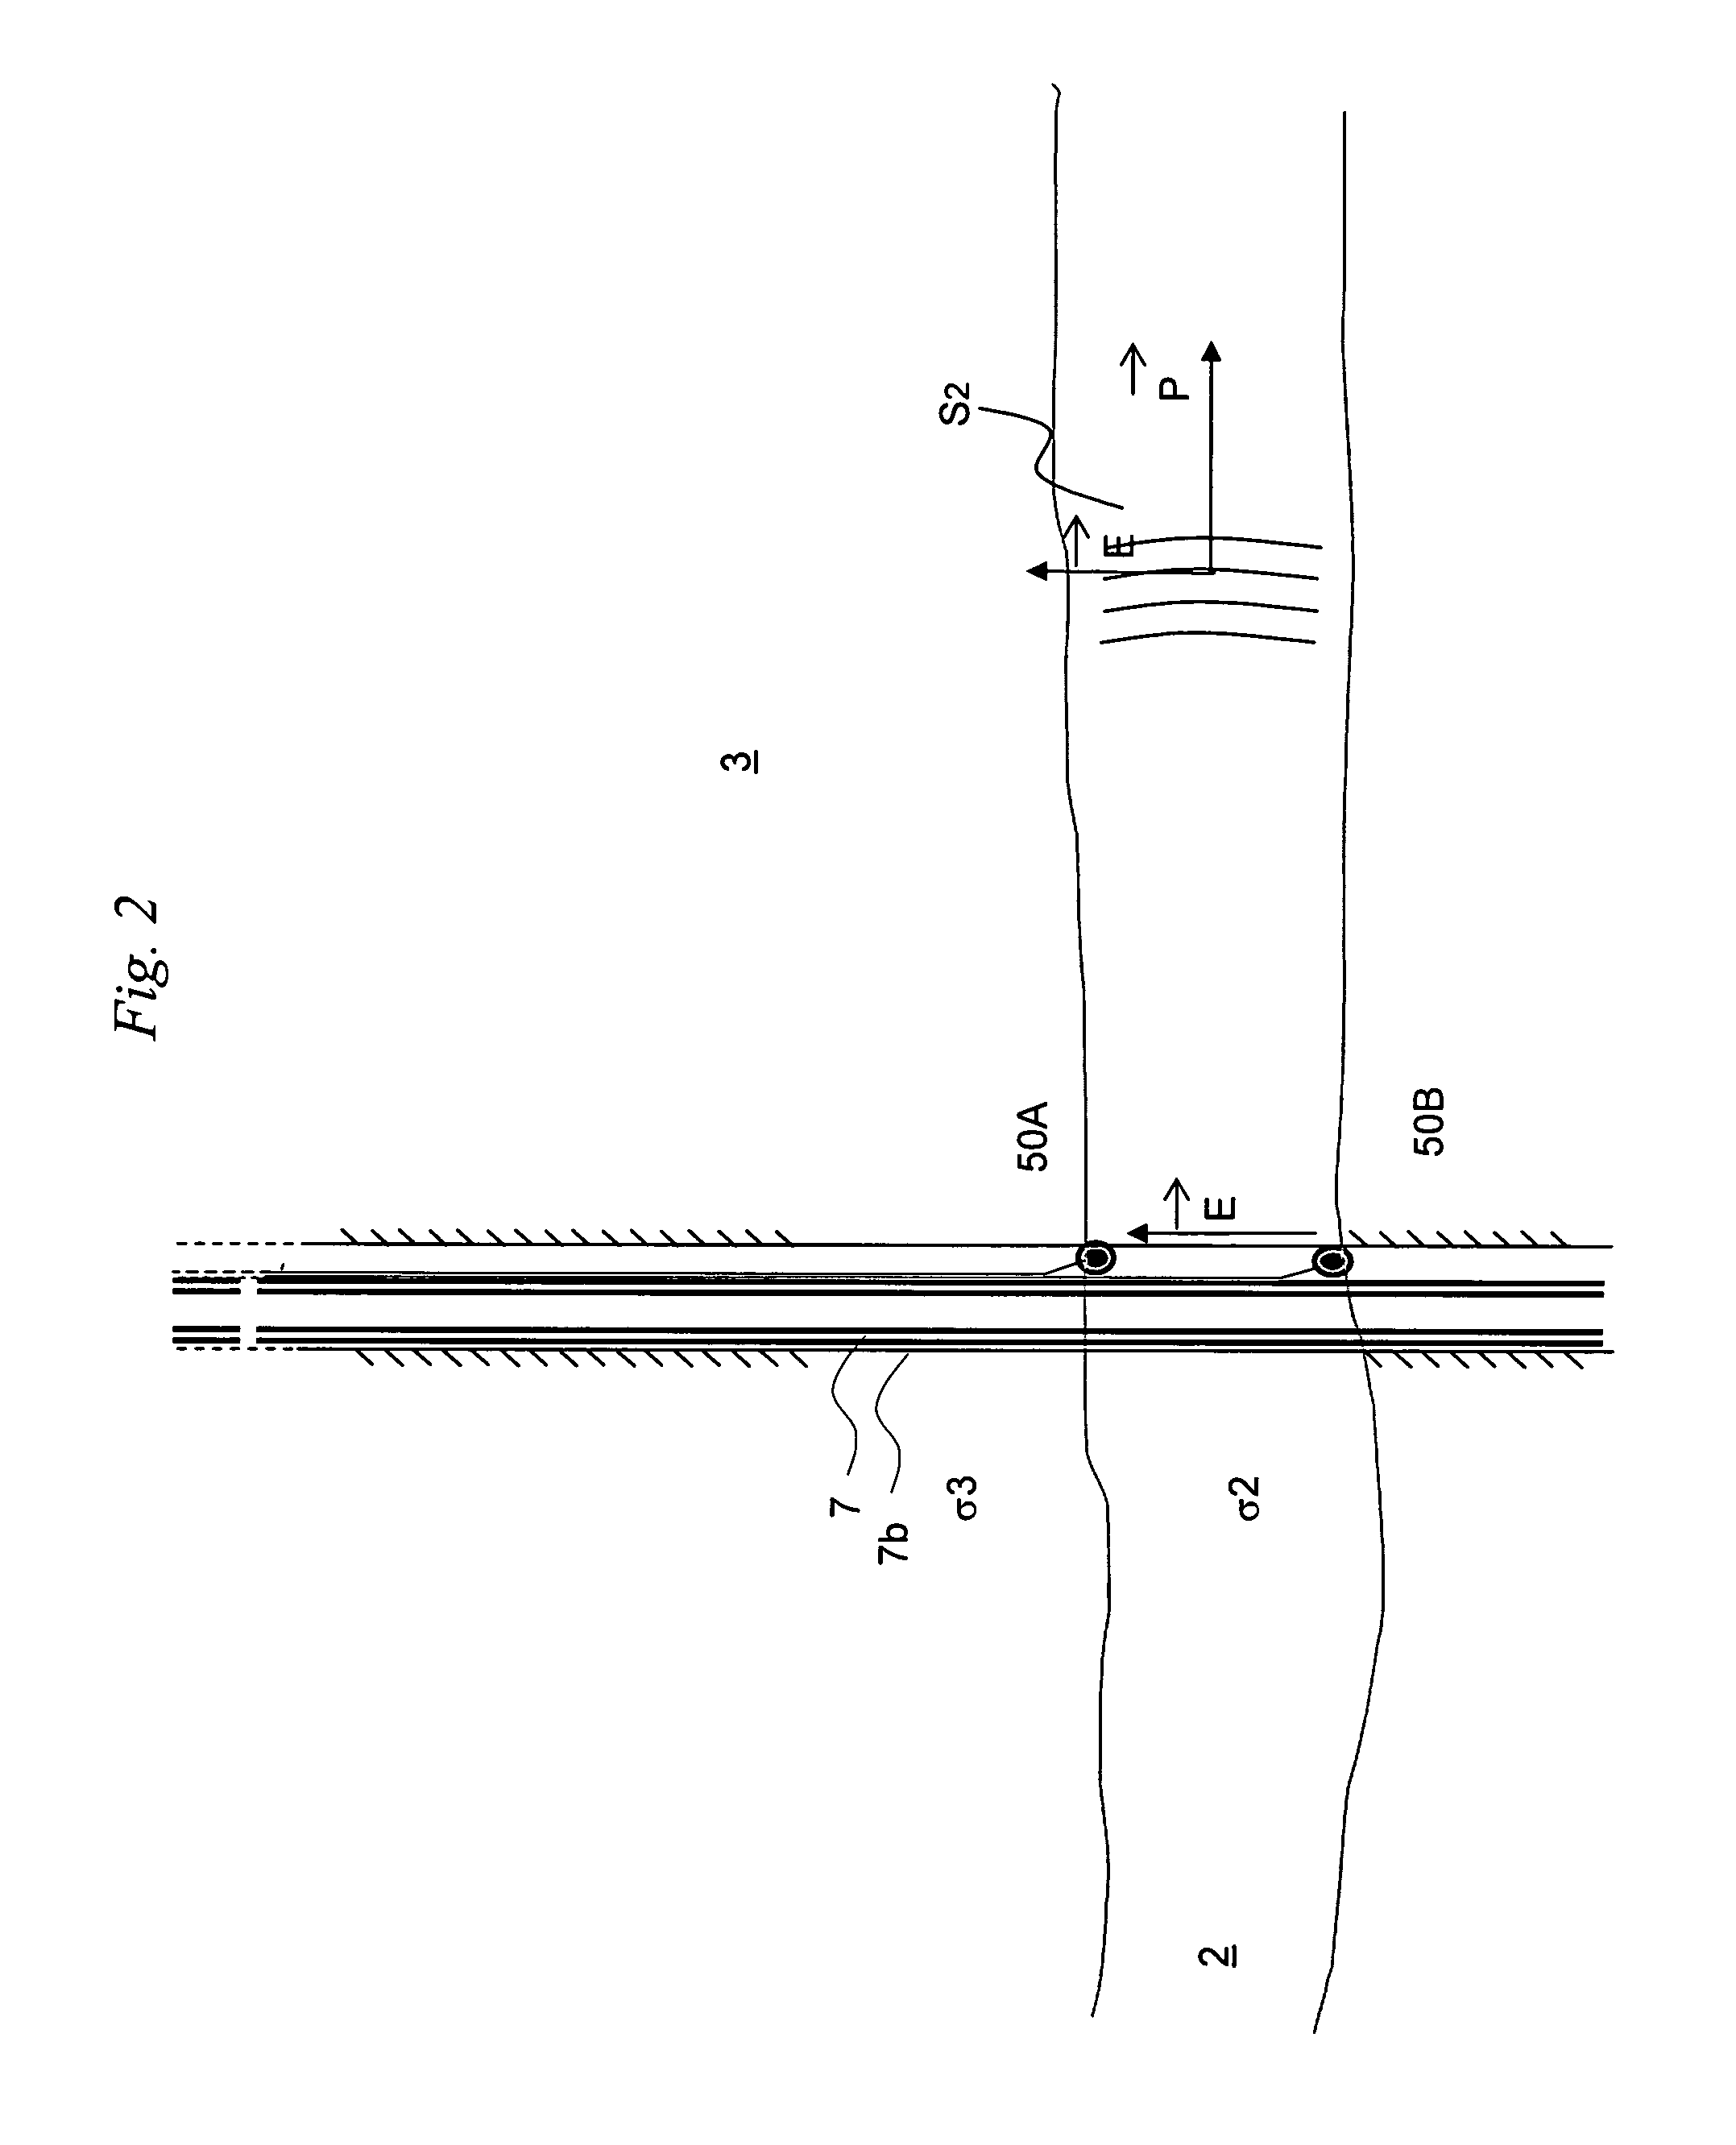 Method for monitoring low-resistivity formation using polarized waves